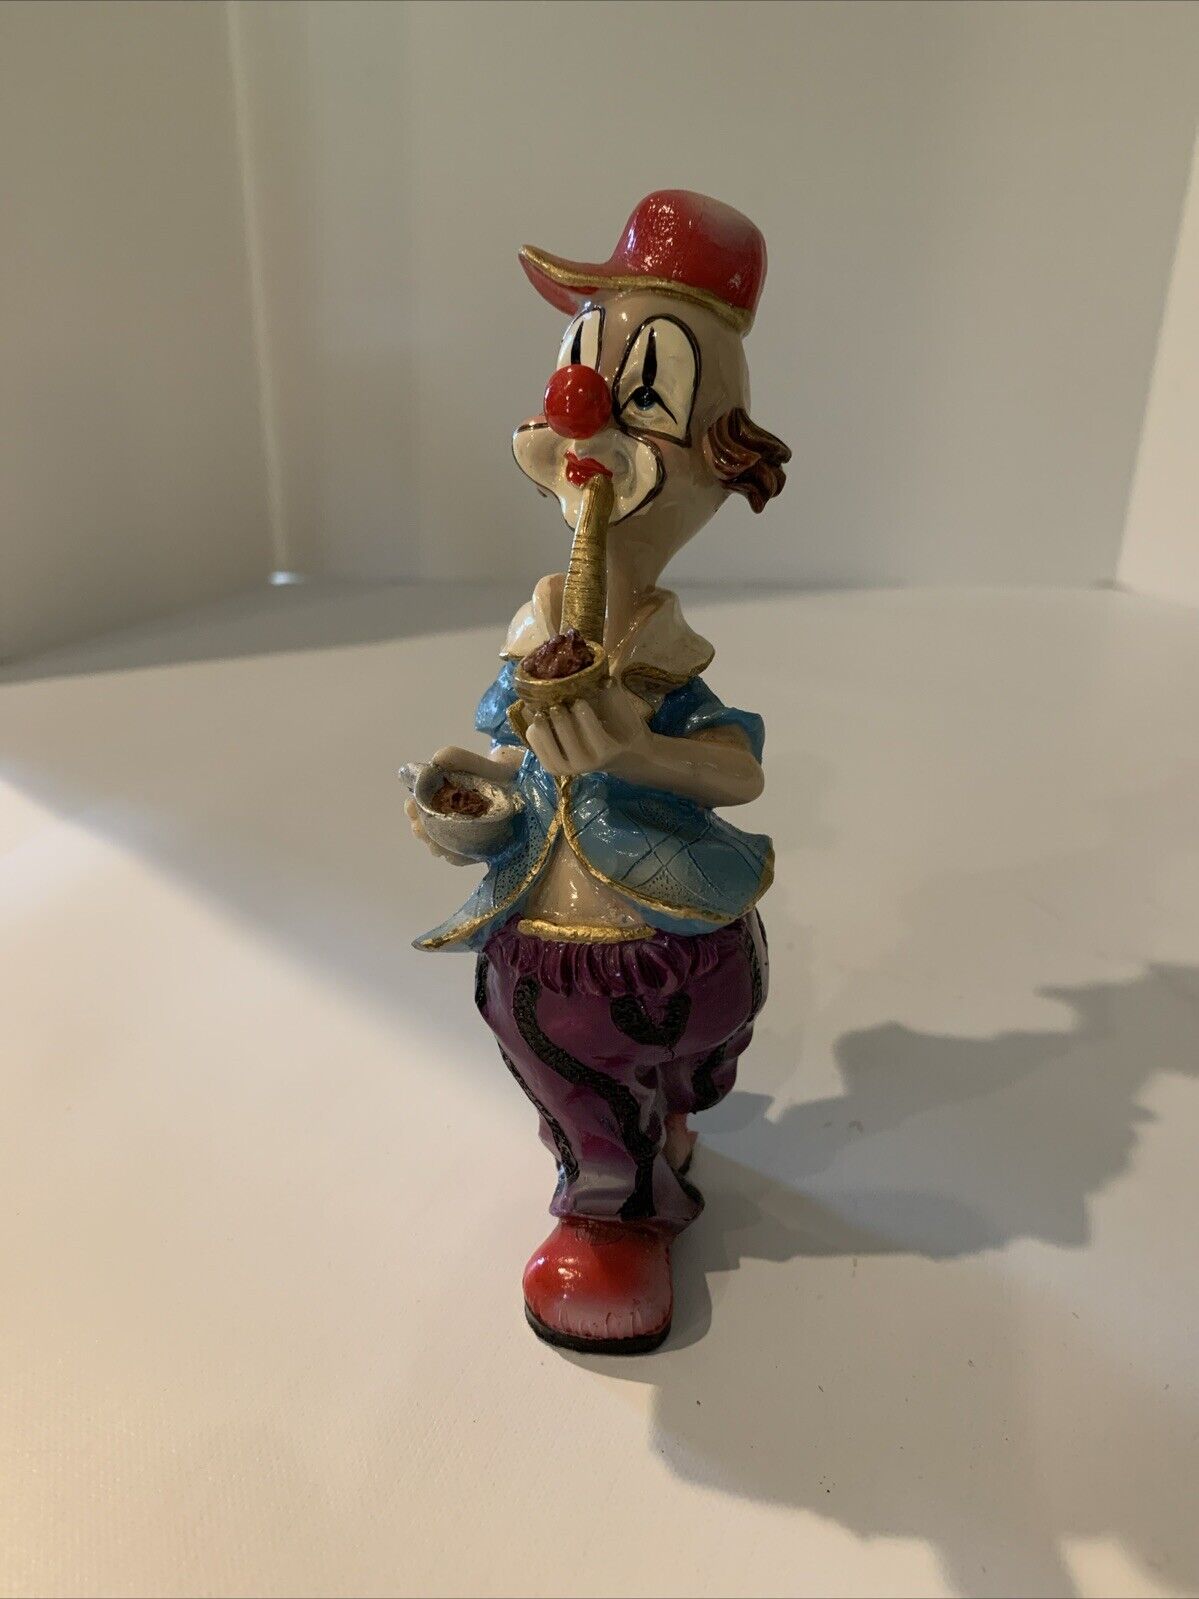 VTG Clown Smoking A Pipe Statue Red Boots Nose And Cap 6” Tall 